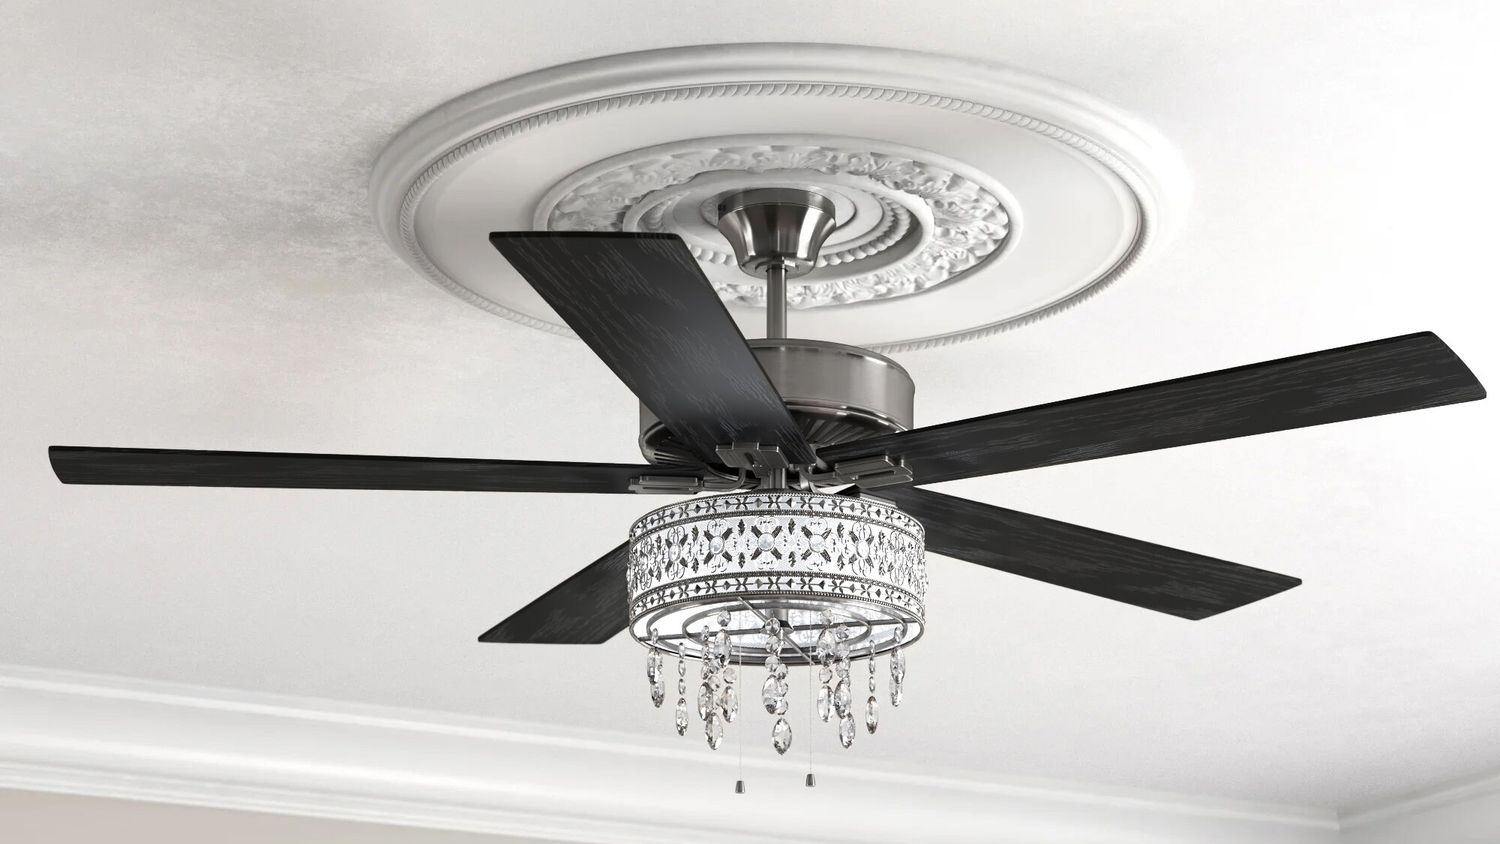 The 10 Best Ceiling Fans In 2021, Best Ceiling Fans With Light And Remote 2020